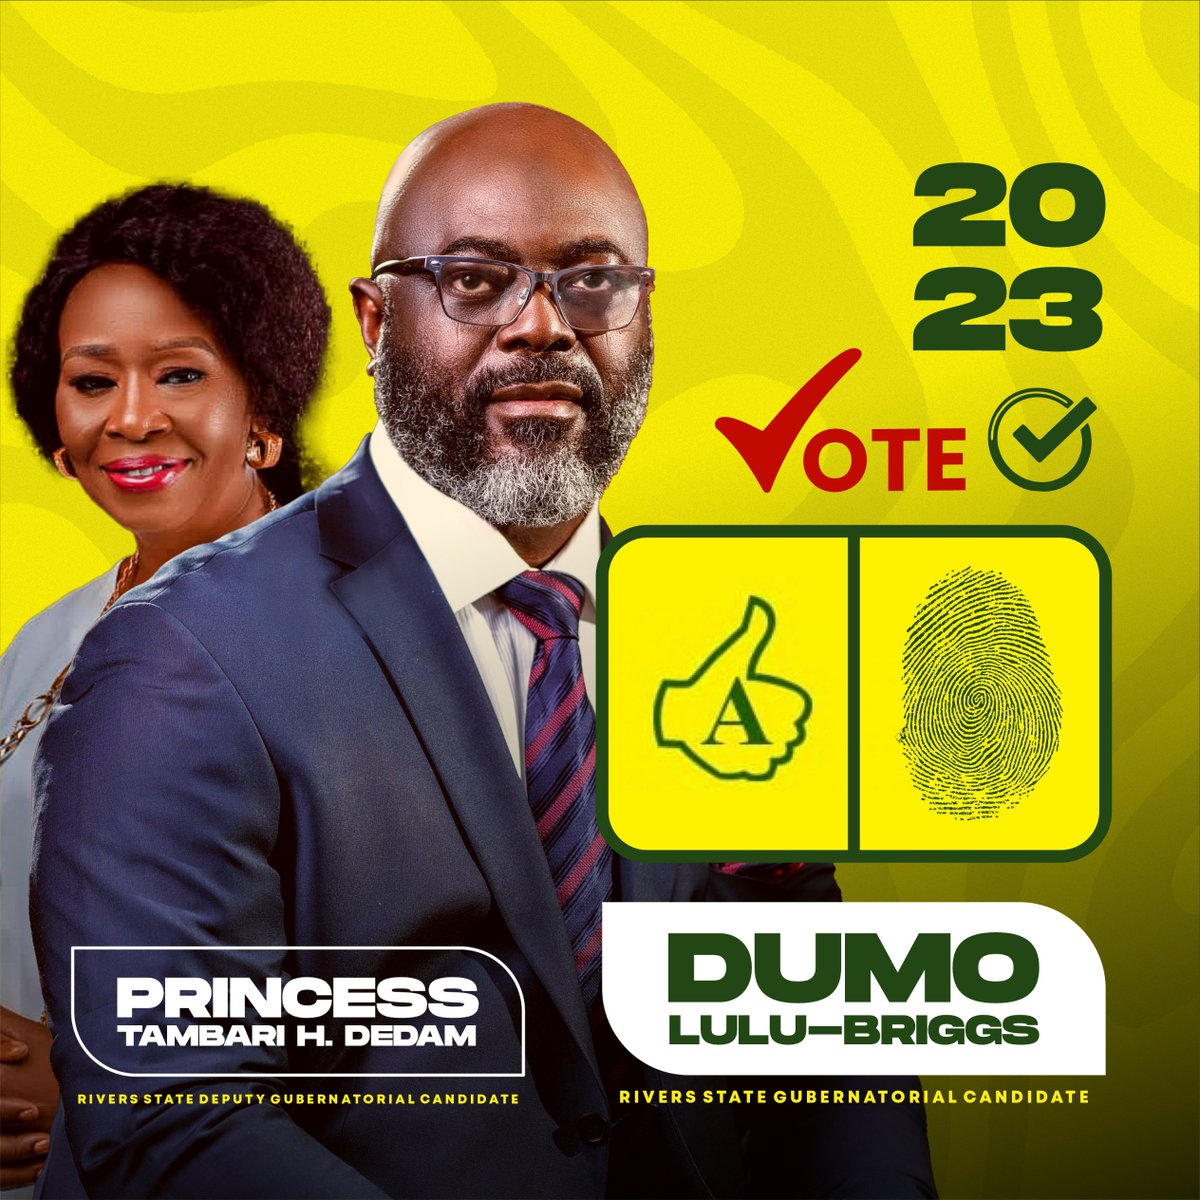 We are “Putting People First”
Come 11th March 2023, we decide and vote ACCORDinly. 
A Renewed Rivers State is possible!

#Dumowilldomore
#SupportDumoLuluBriggs
#VoteDumoLuluBriggsforGovernor
#RiversState2023